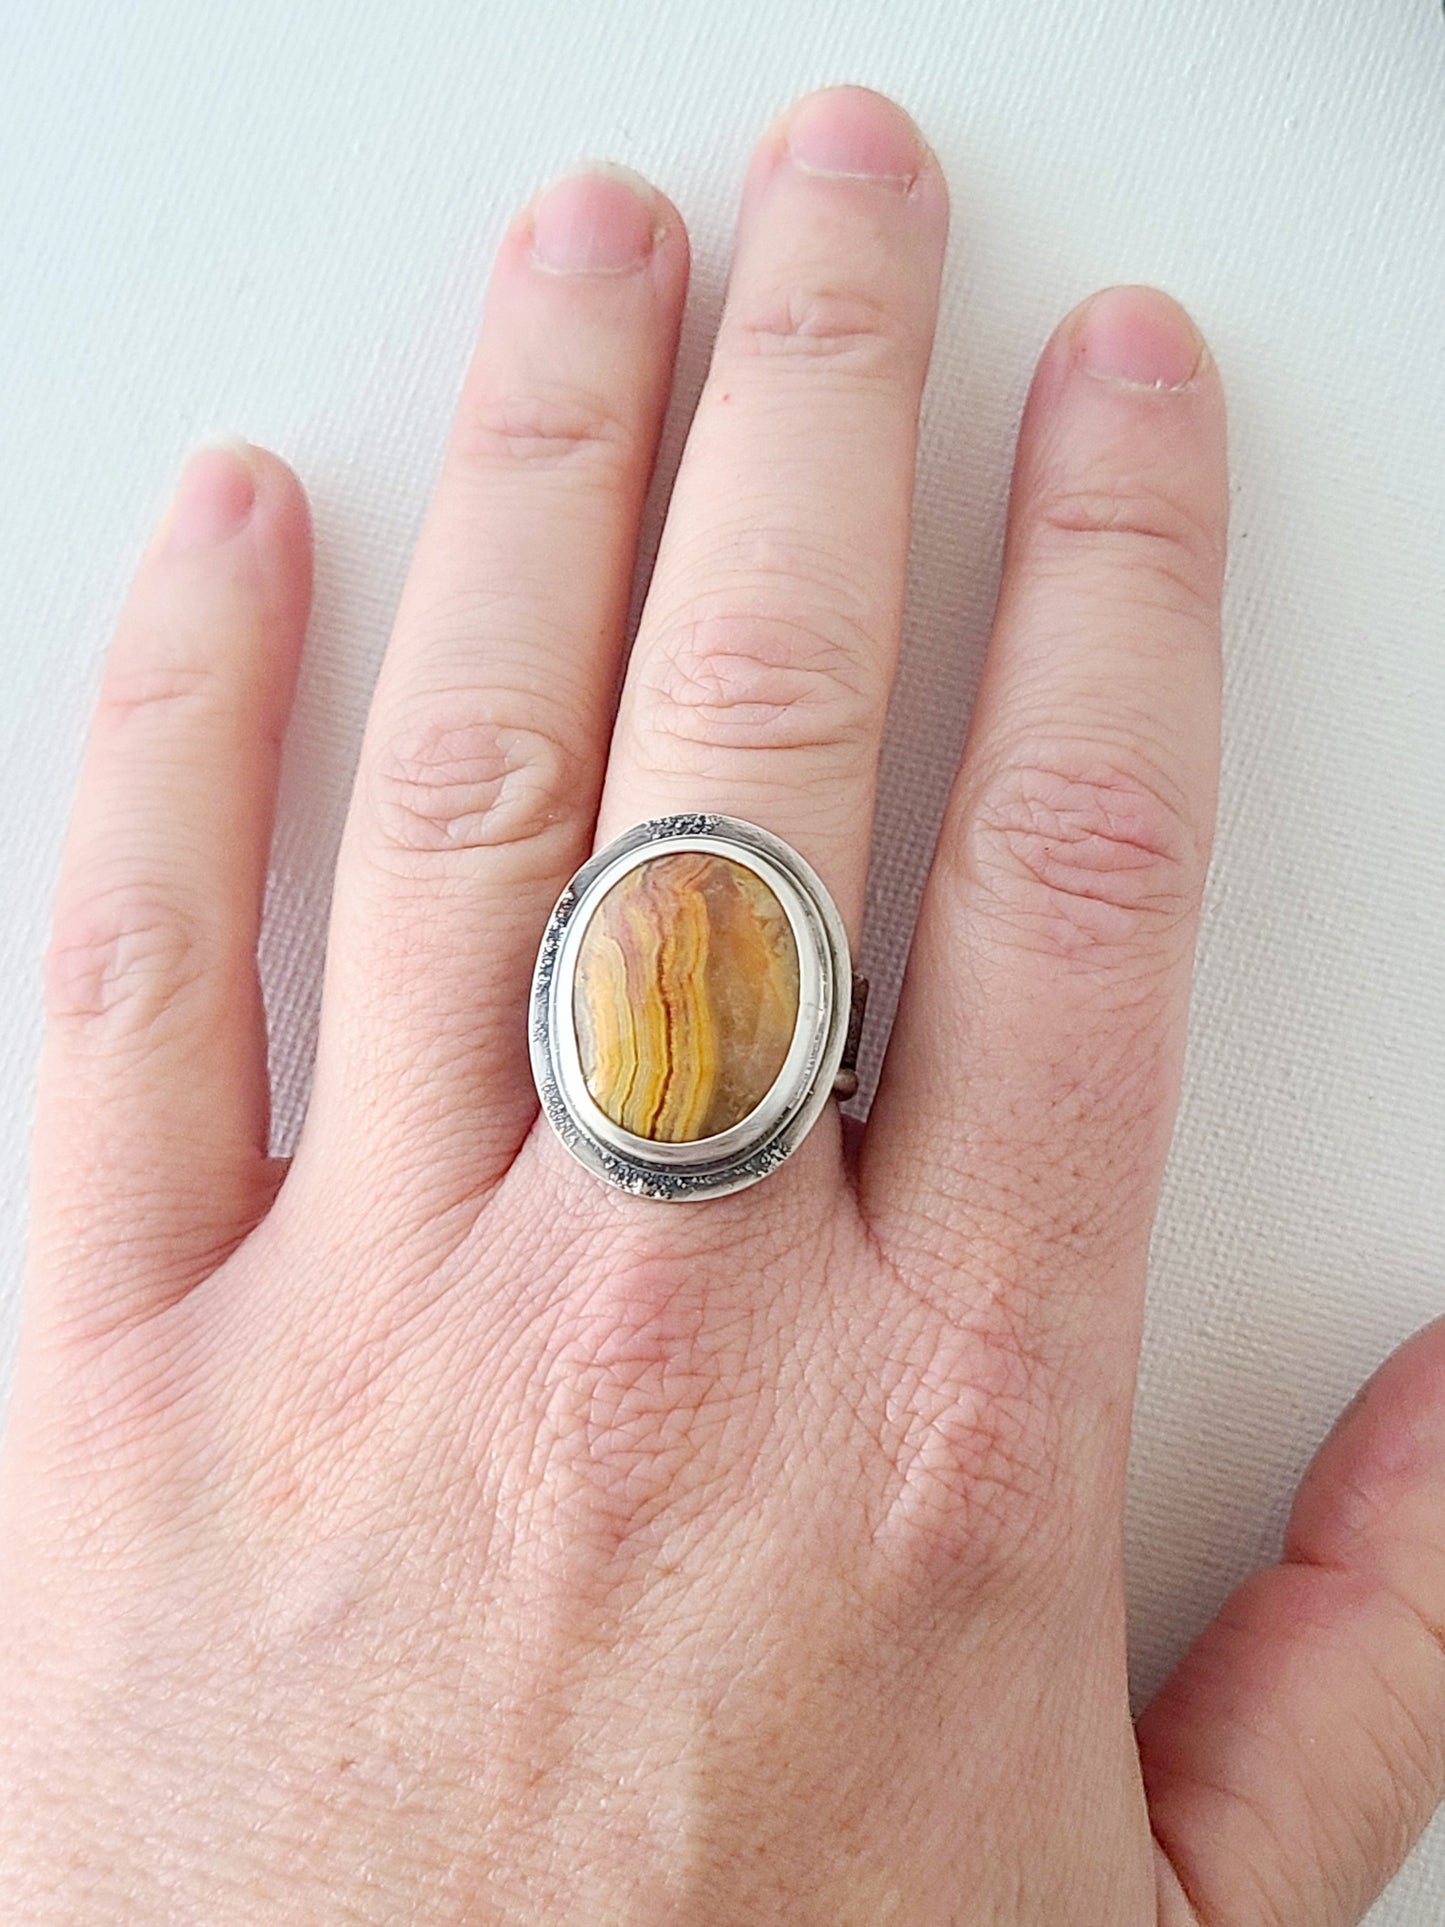 Australian Crazy Lace agate ring-size 8.75 US